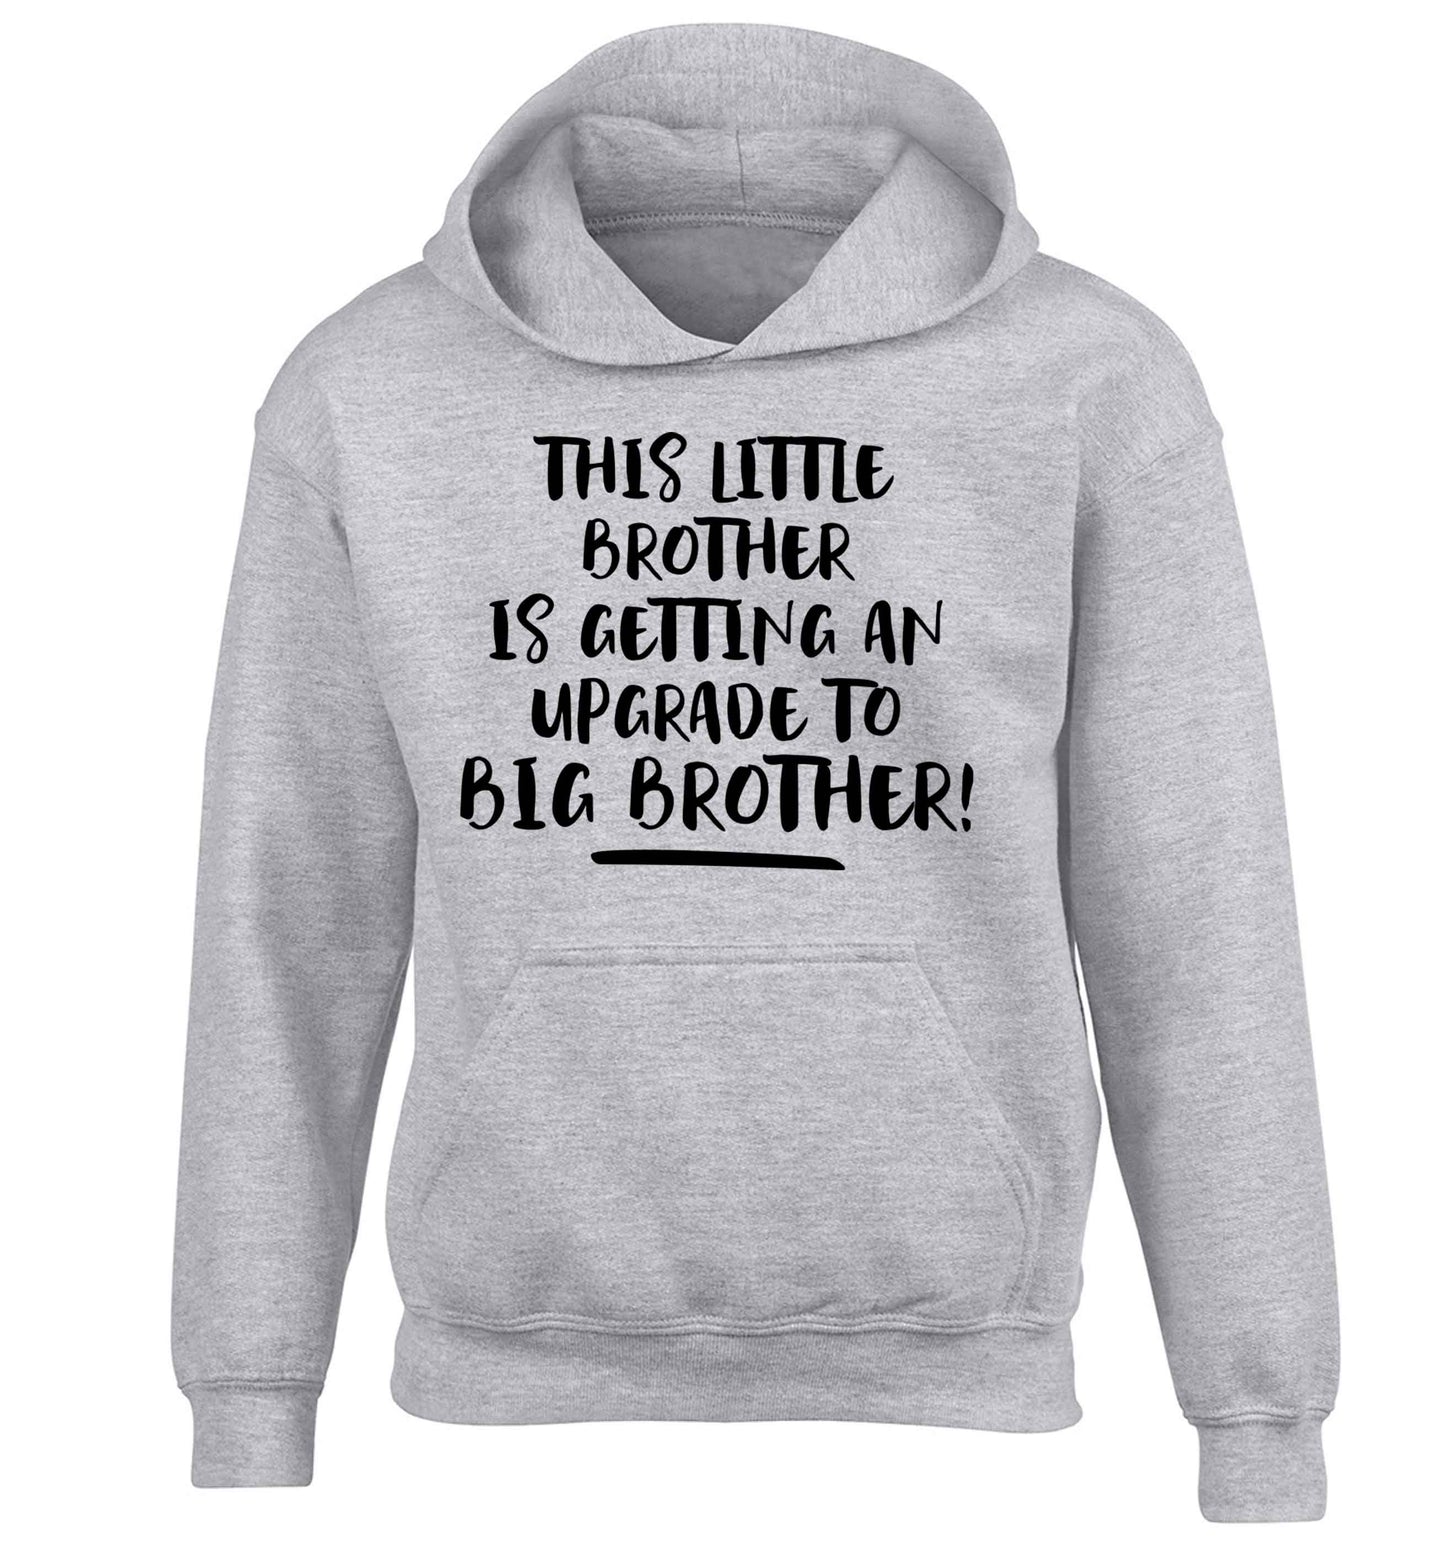 This little brother is getting an upgrade to big brother! children's grey hoodie 12-13 Years